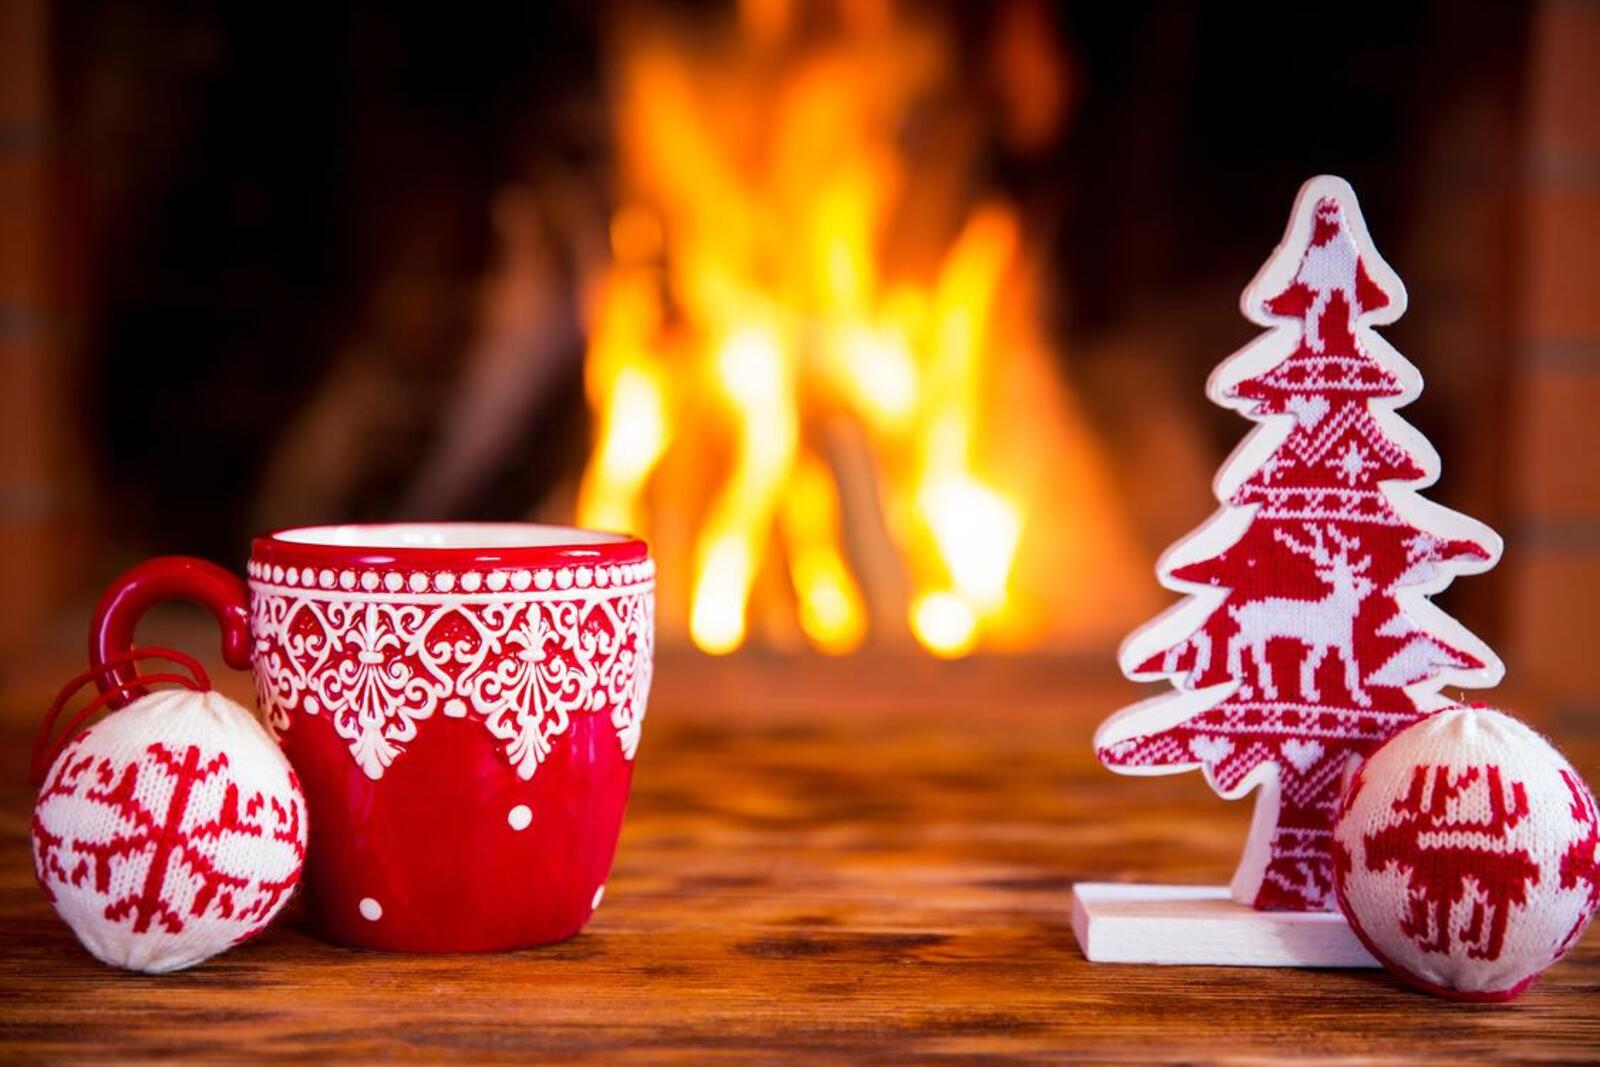 Wallpapers cup bonfire holiday on the desktop